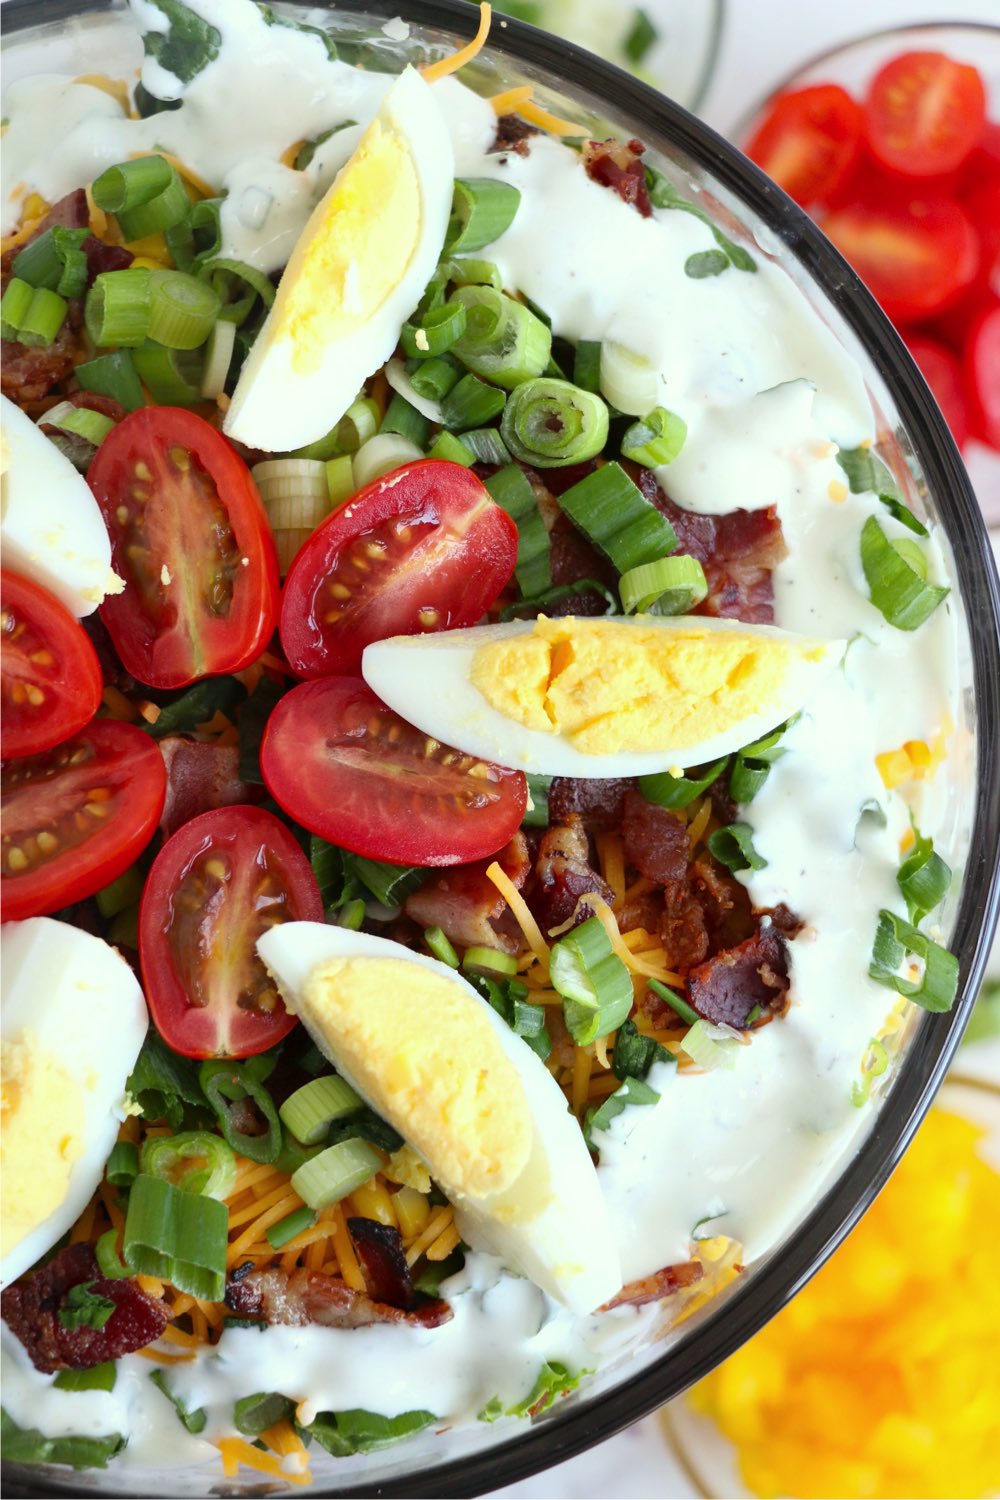 top view of layered salad with eggs and tomatoes